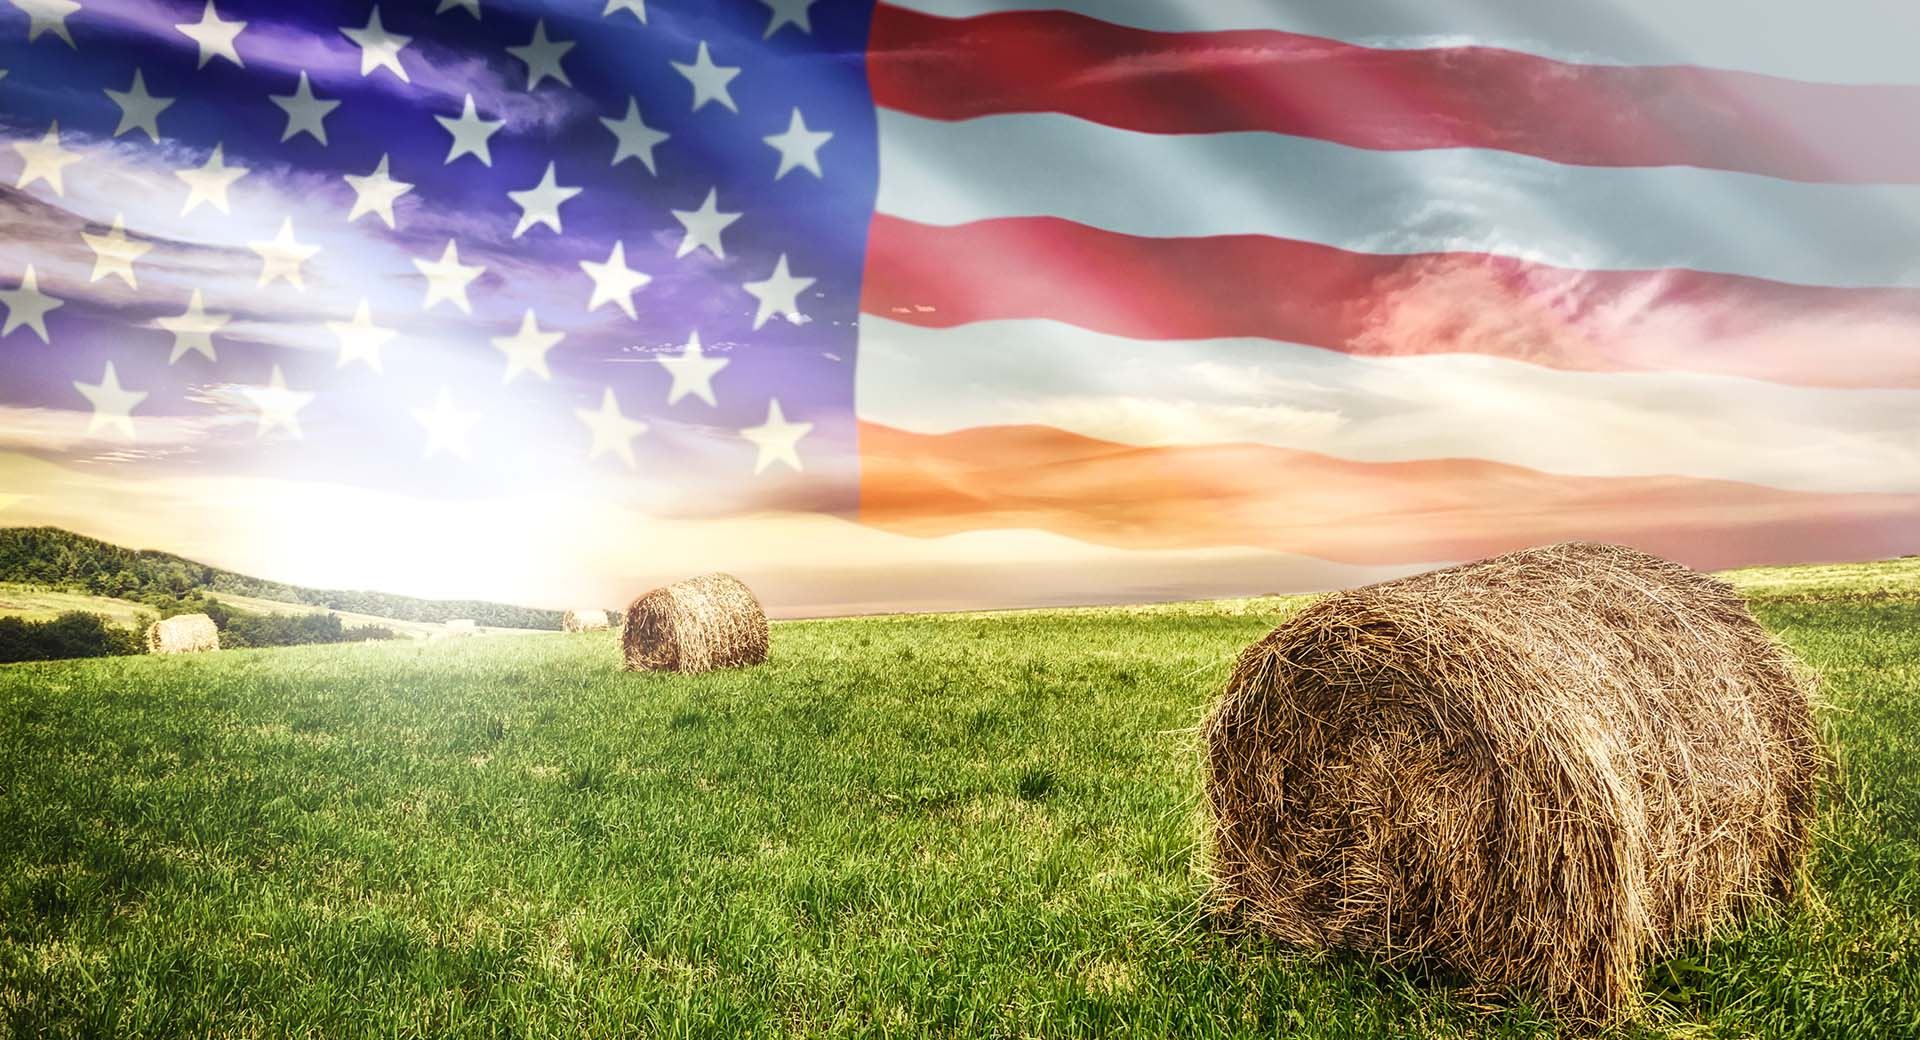 American flag in background over a green field and hay bales